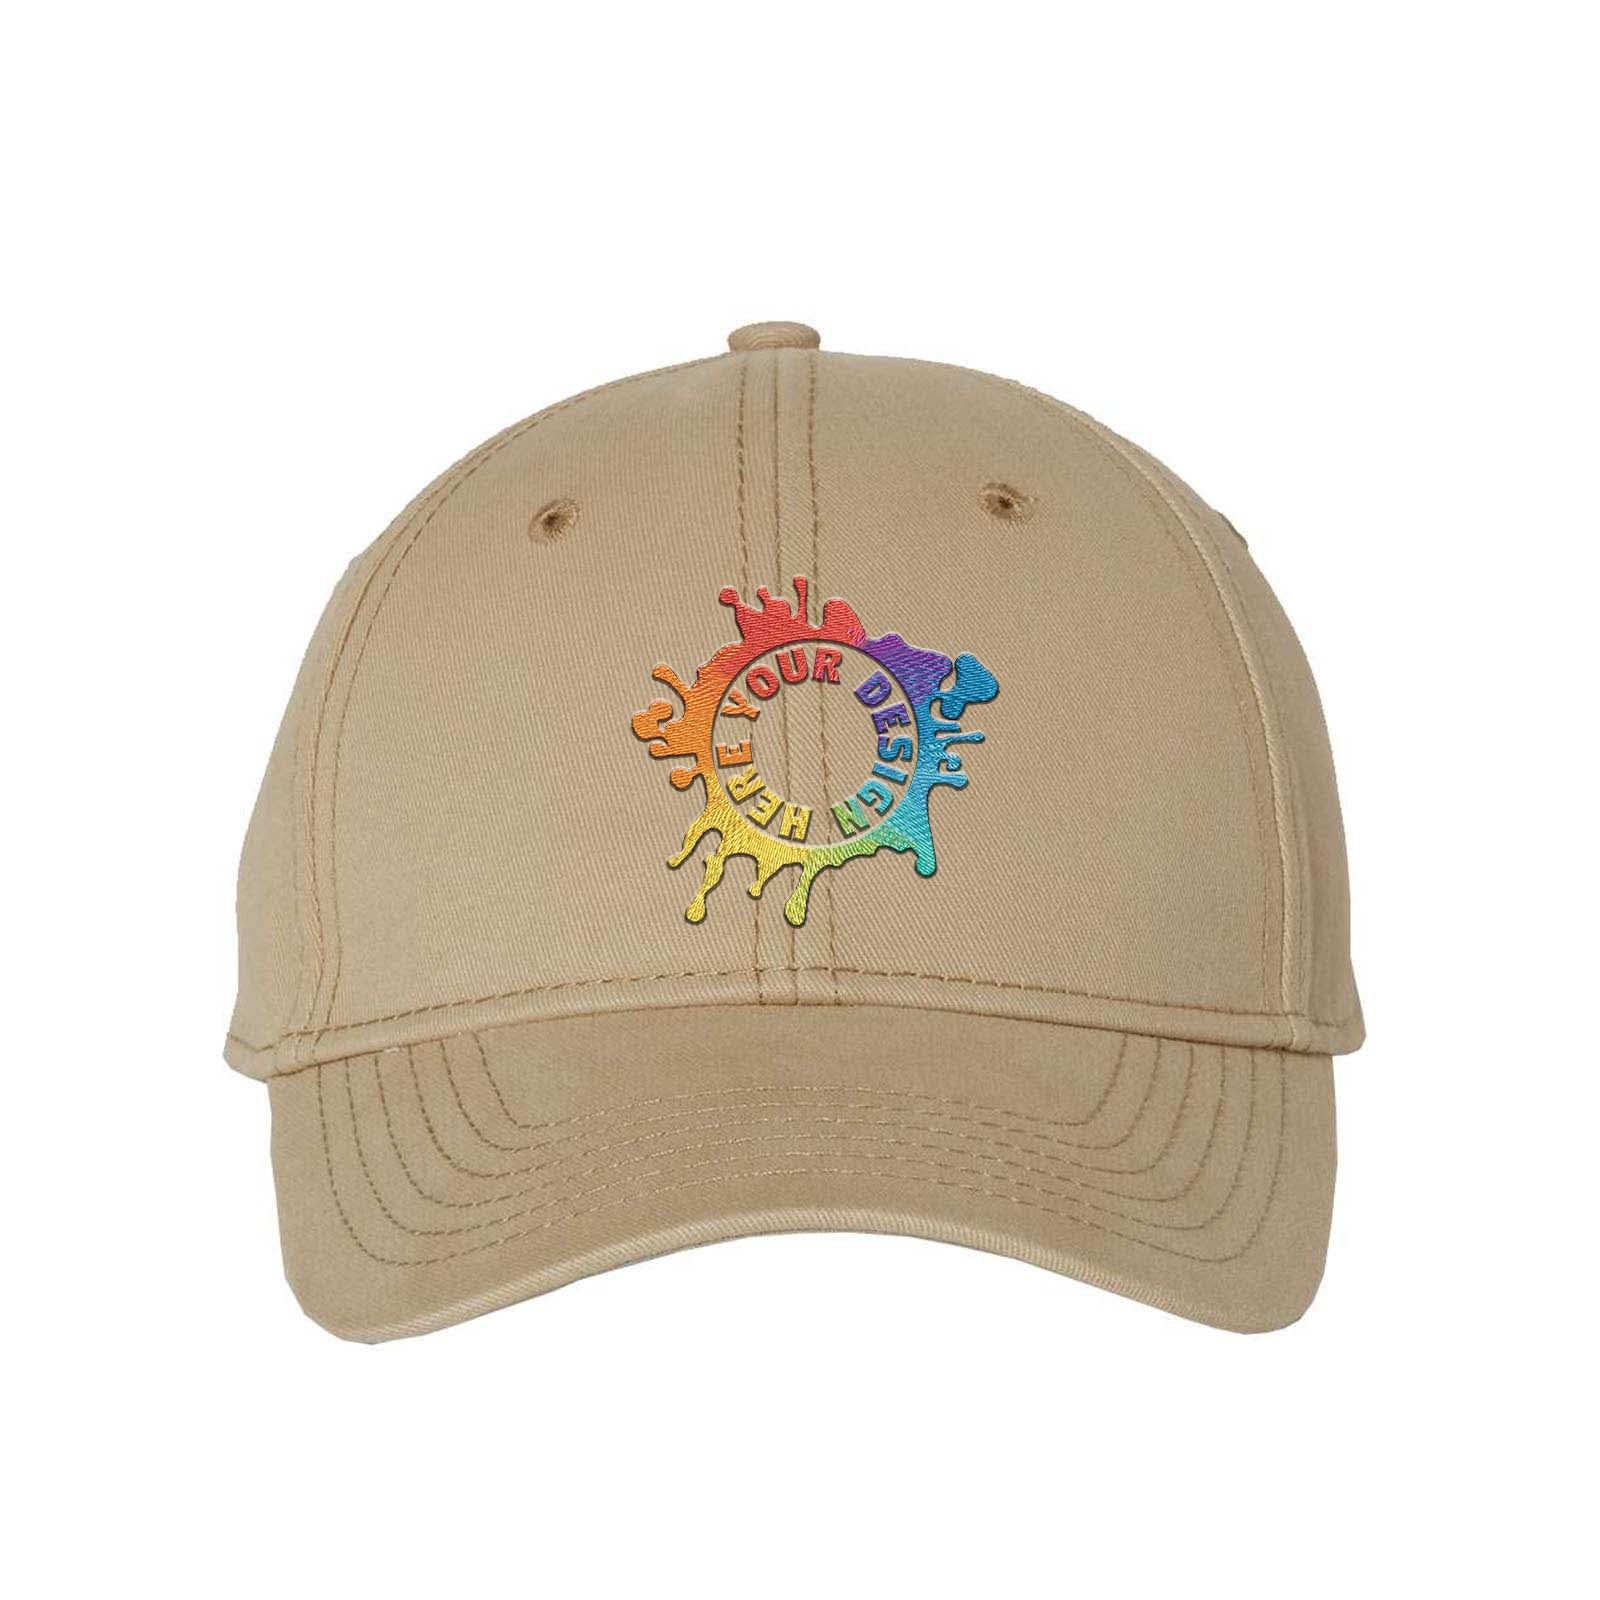 Embroidery cotton adjustable cap